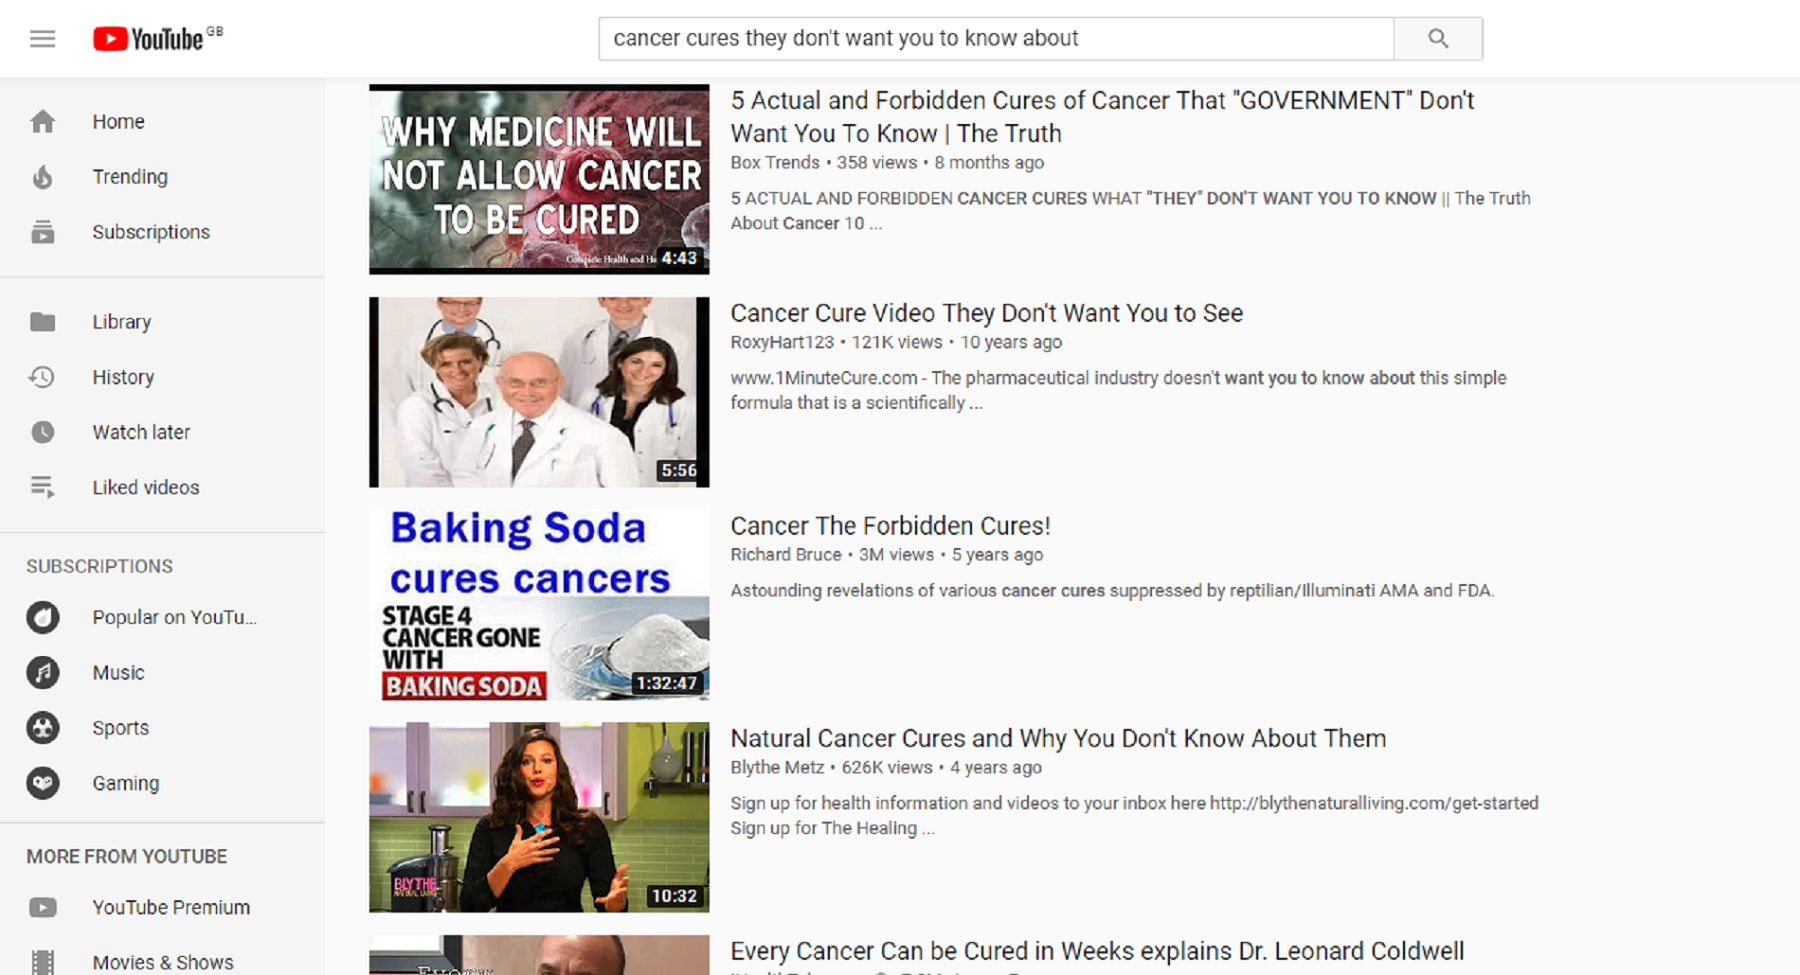 Carrot juice to cure stage four cancer: the dangerous world of YouTube home remedies